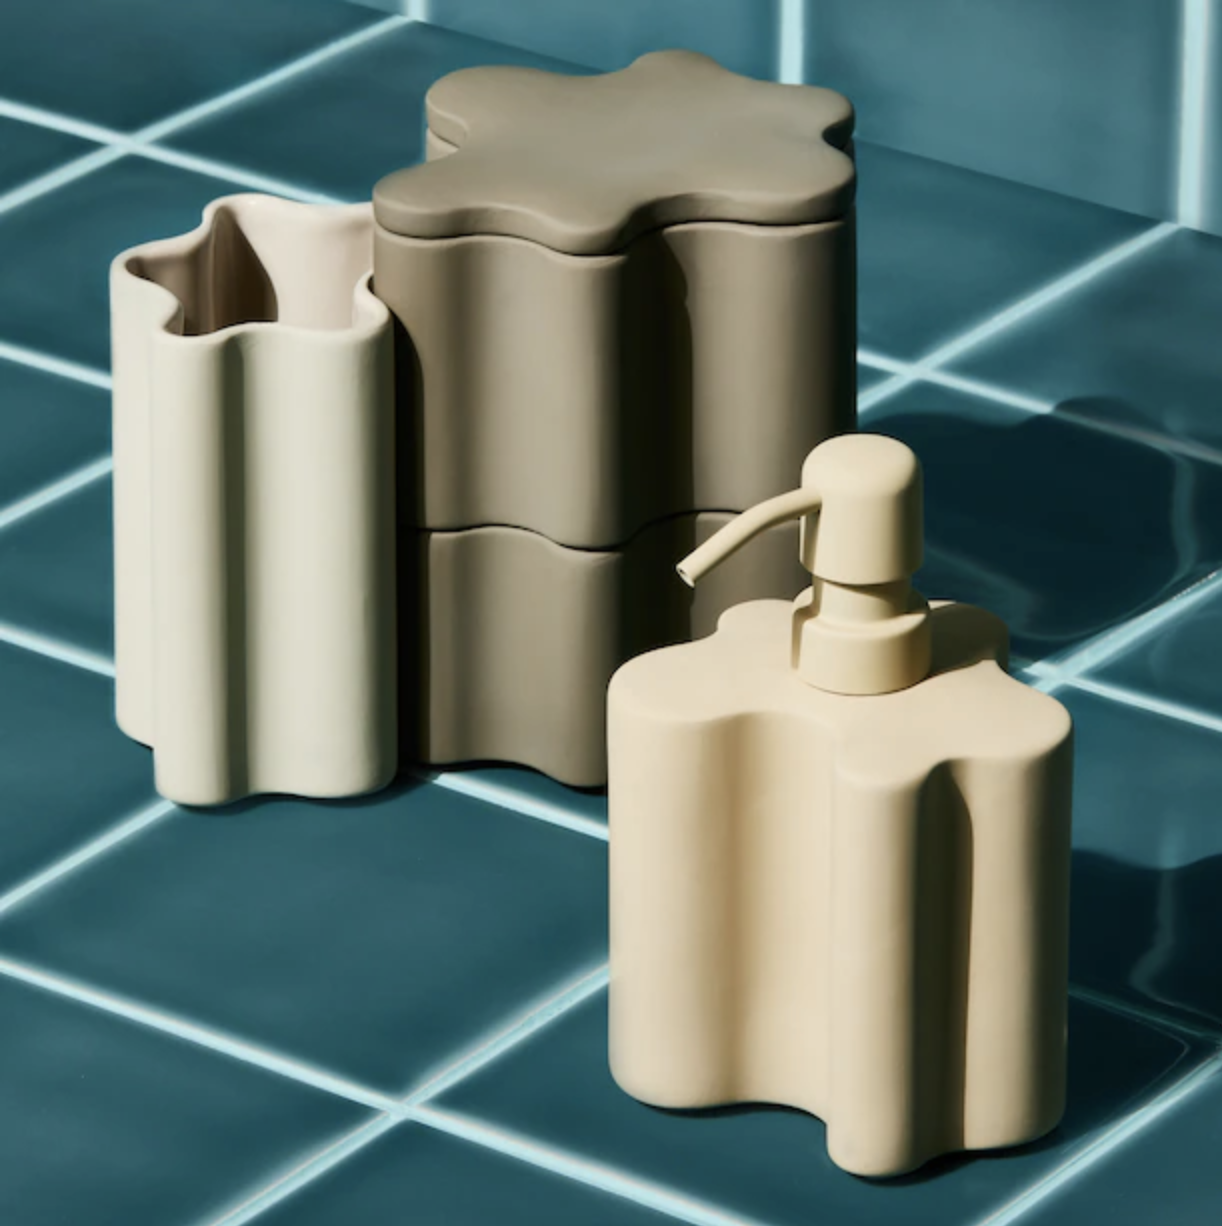 a set of three canisters and a soap bottle with irregular shapes